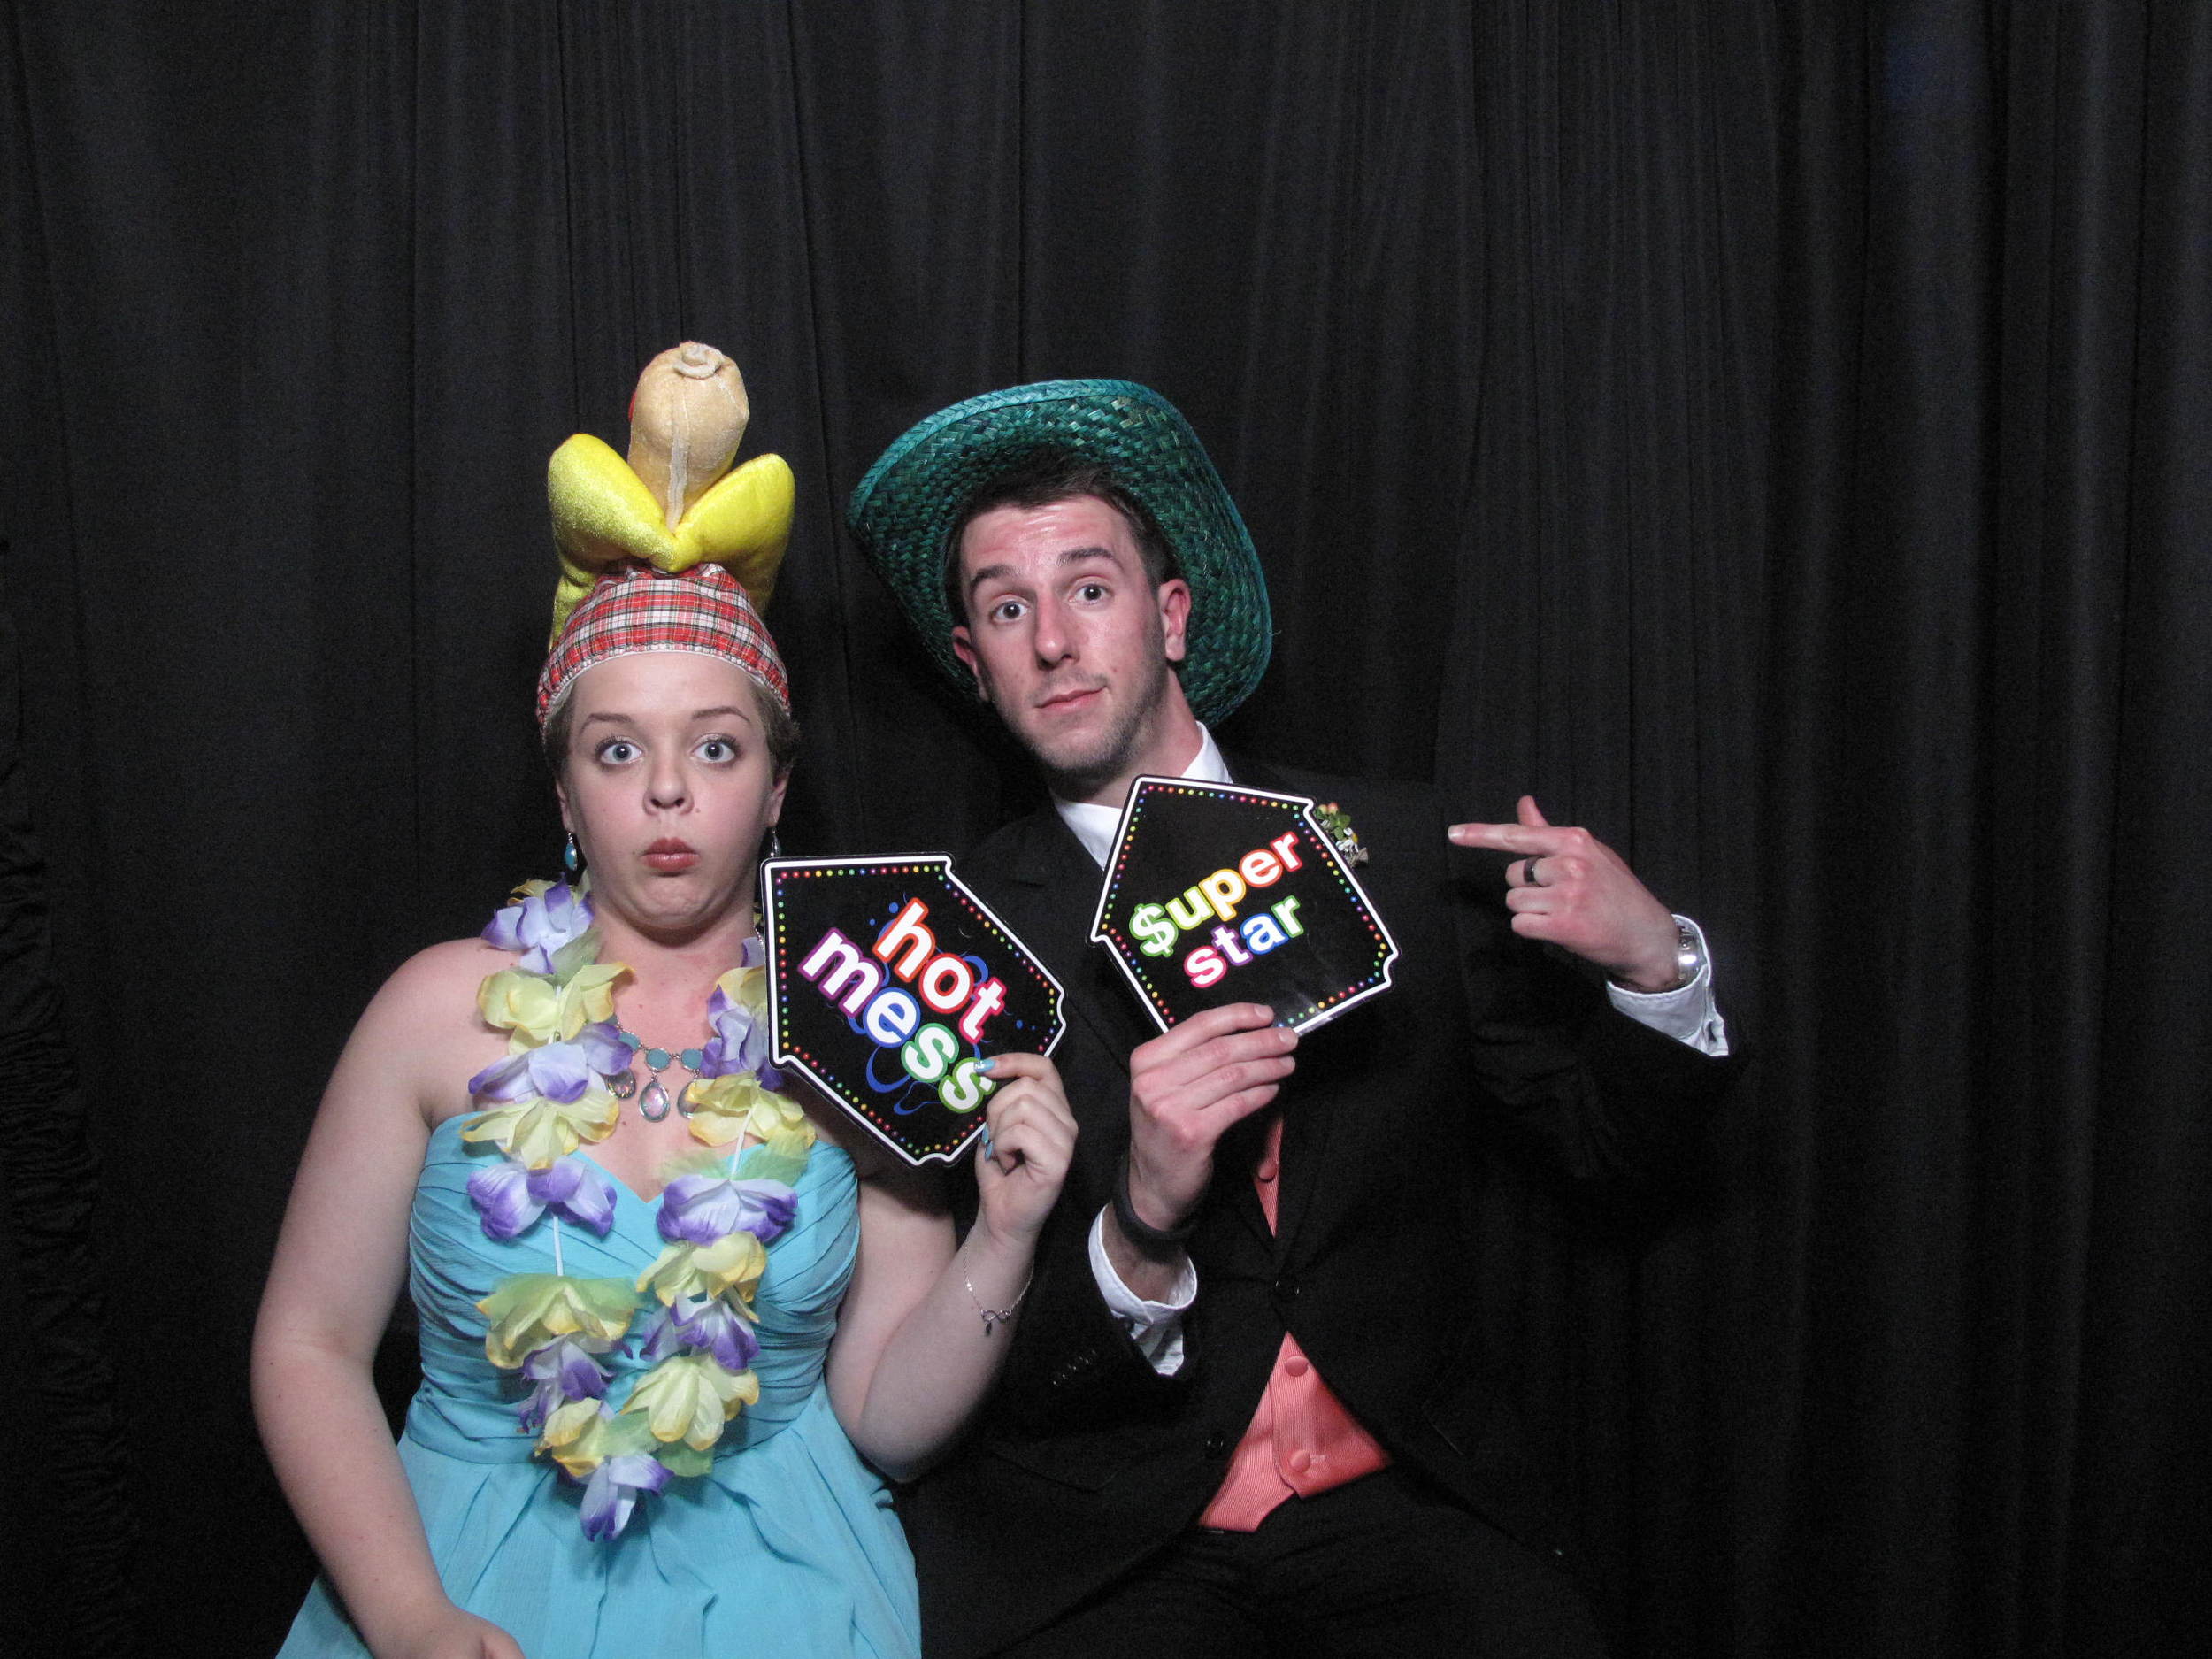 Snapshot Photobooths at The Windsor Ballroom in East Windsor, New Jersey